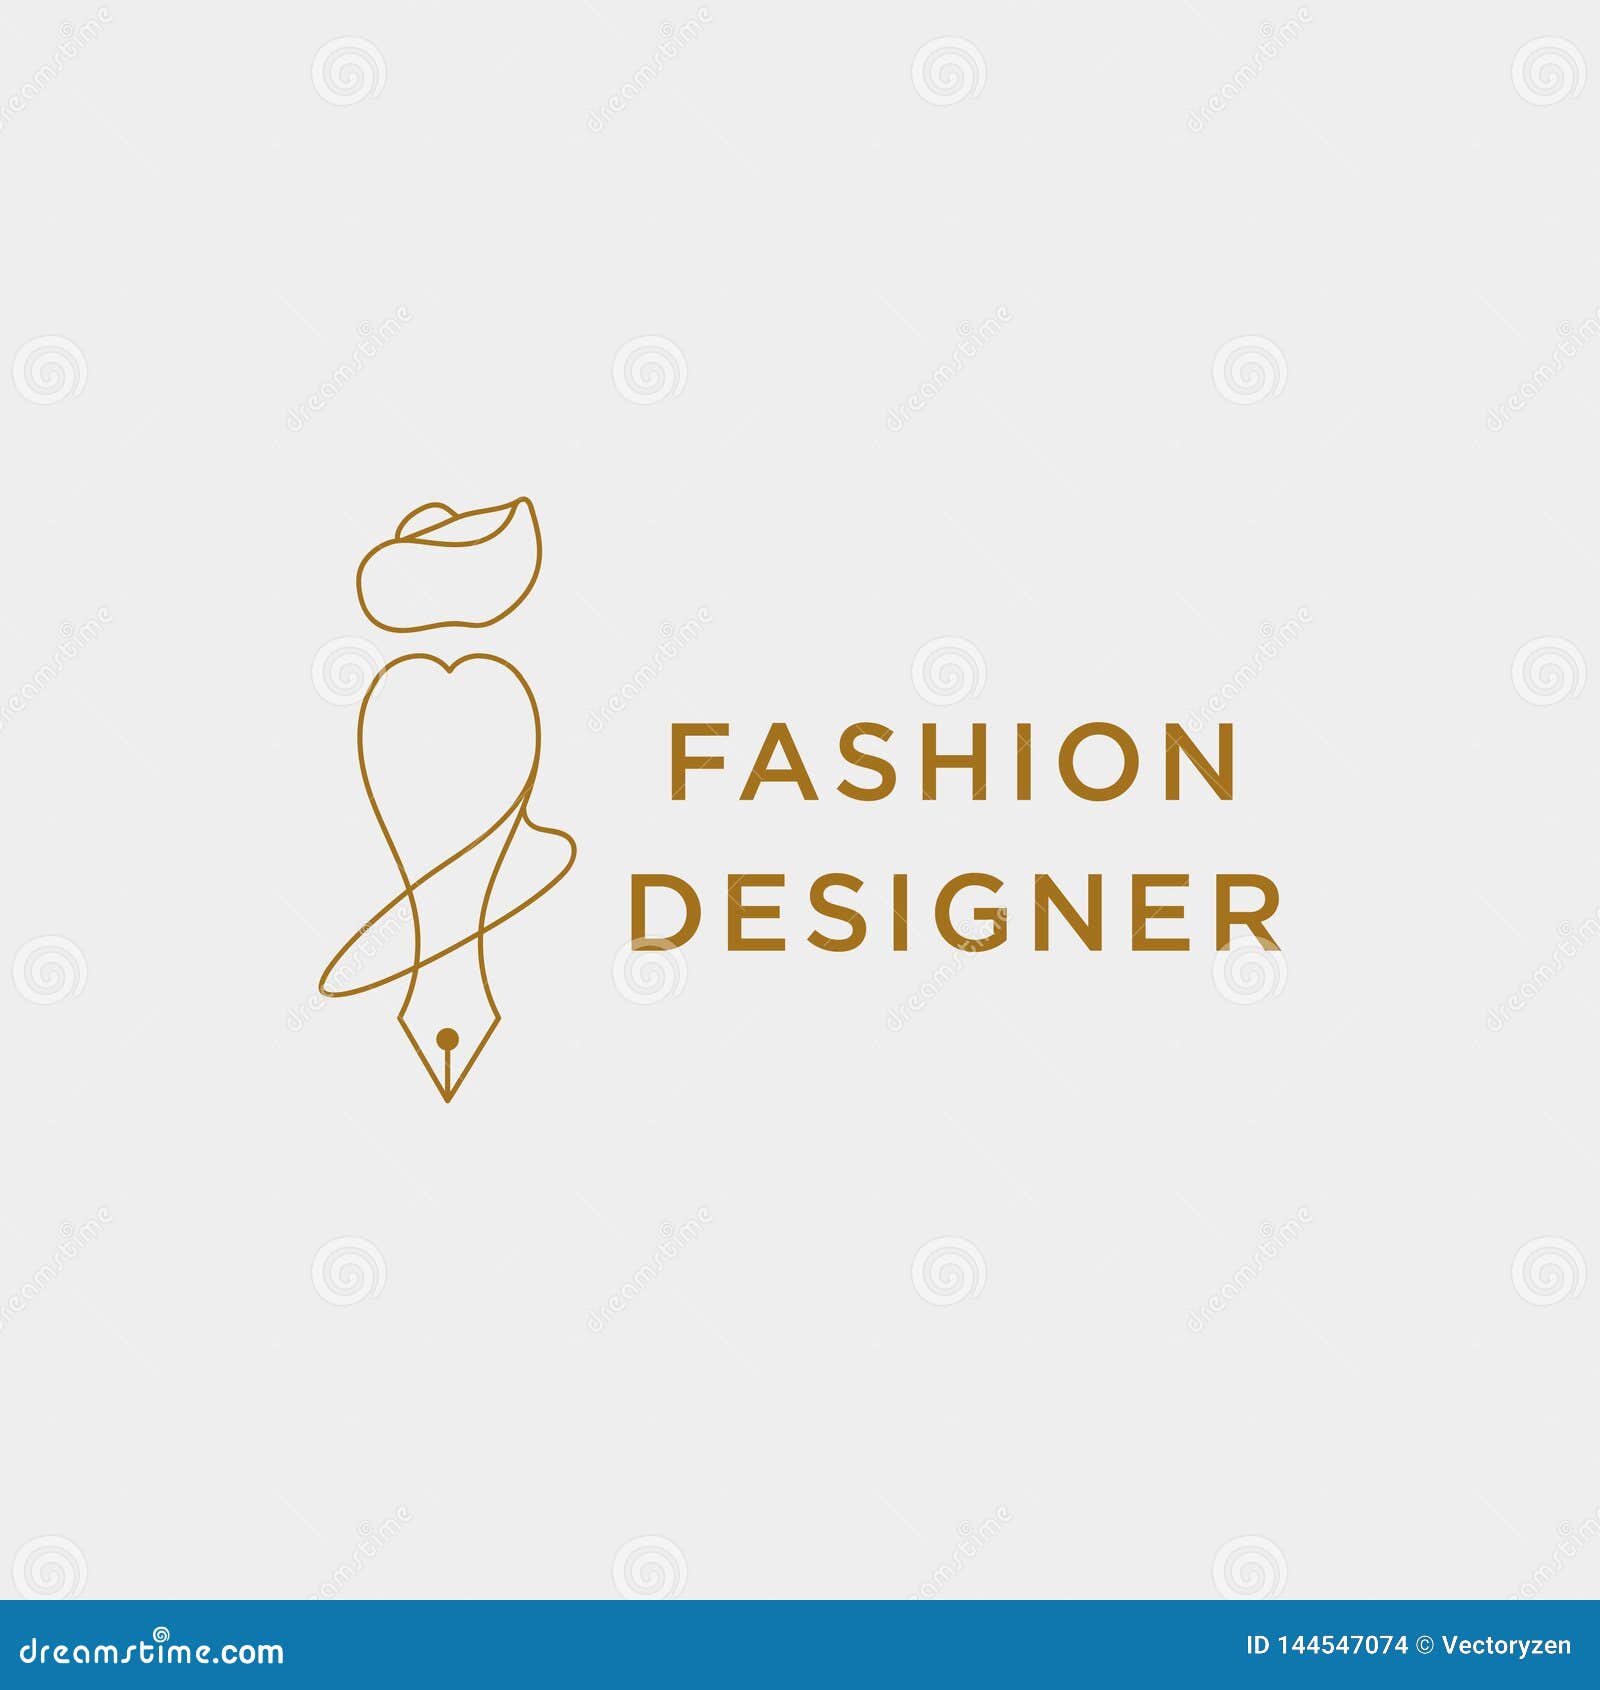 Fashion Writer or Designer in Simple Line Logo Template Vector ...